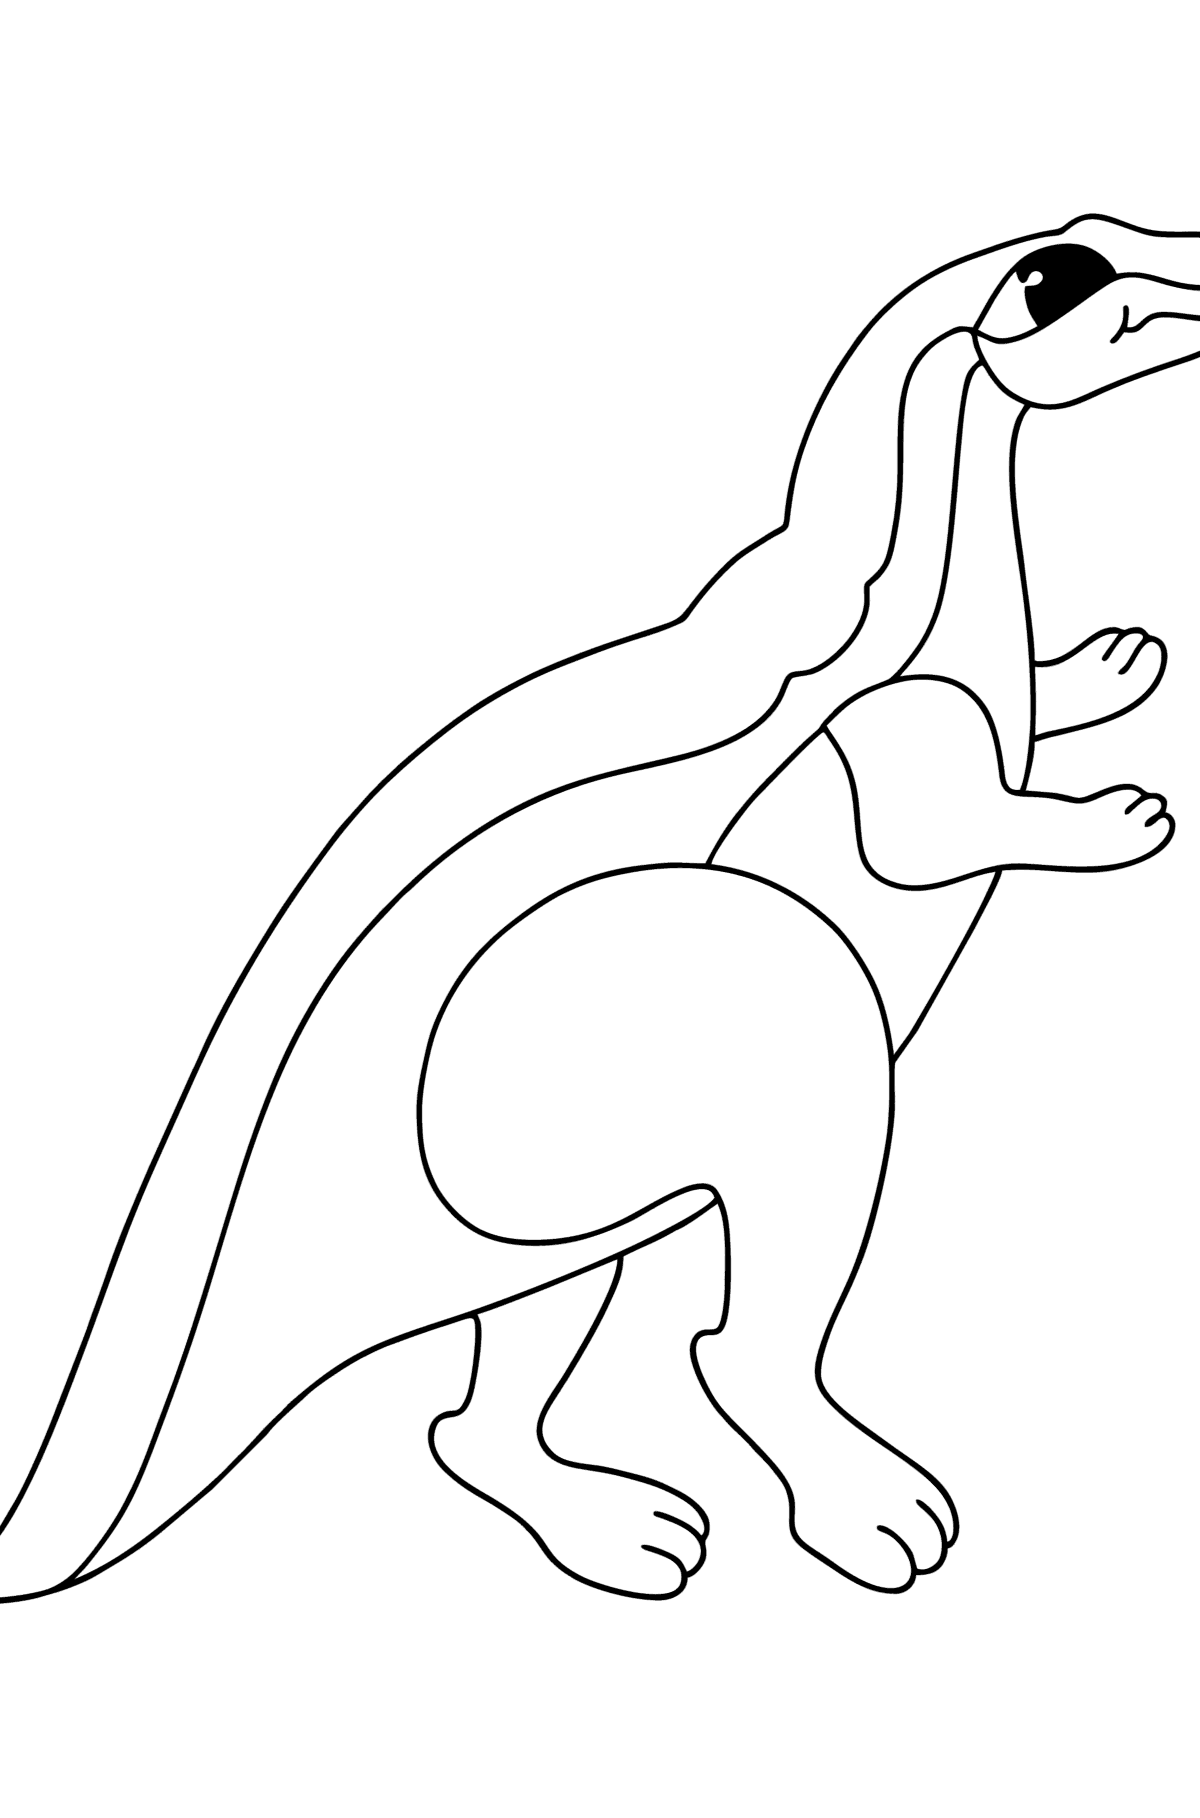 Agilisaurus coloring page - Coloring Pages for Kids